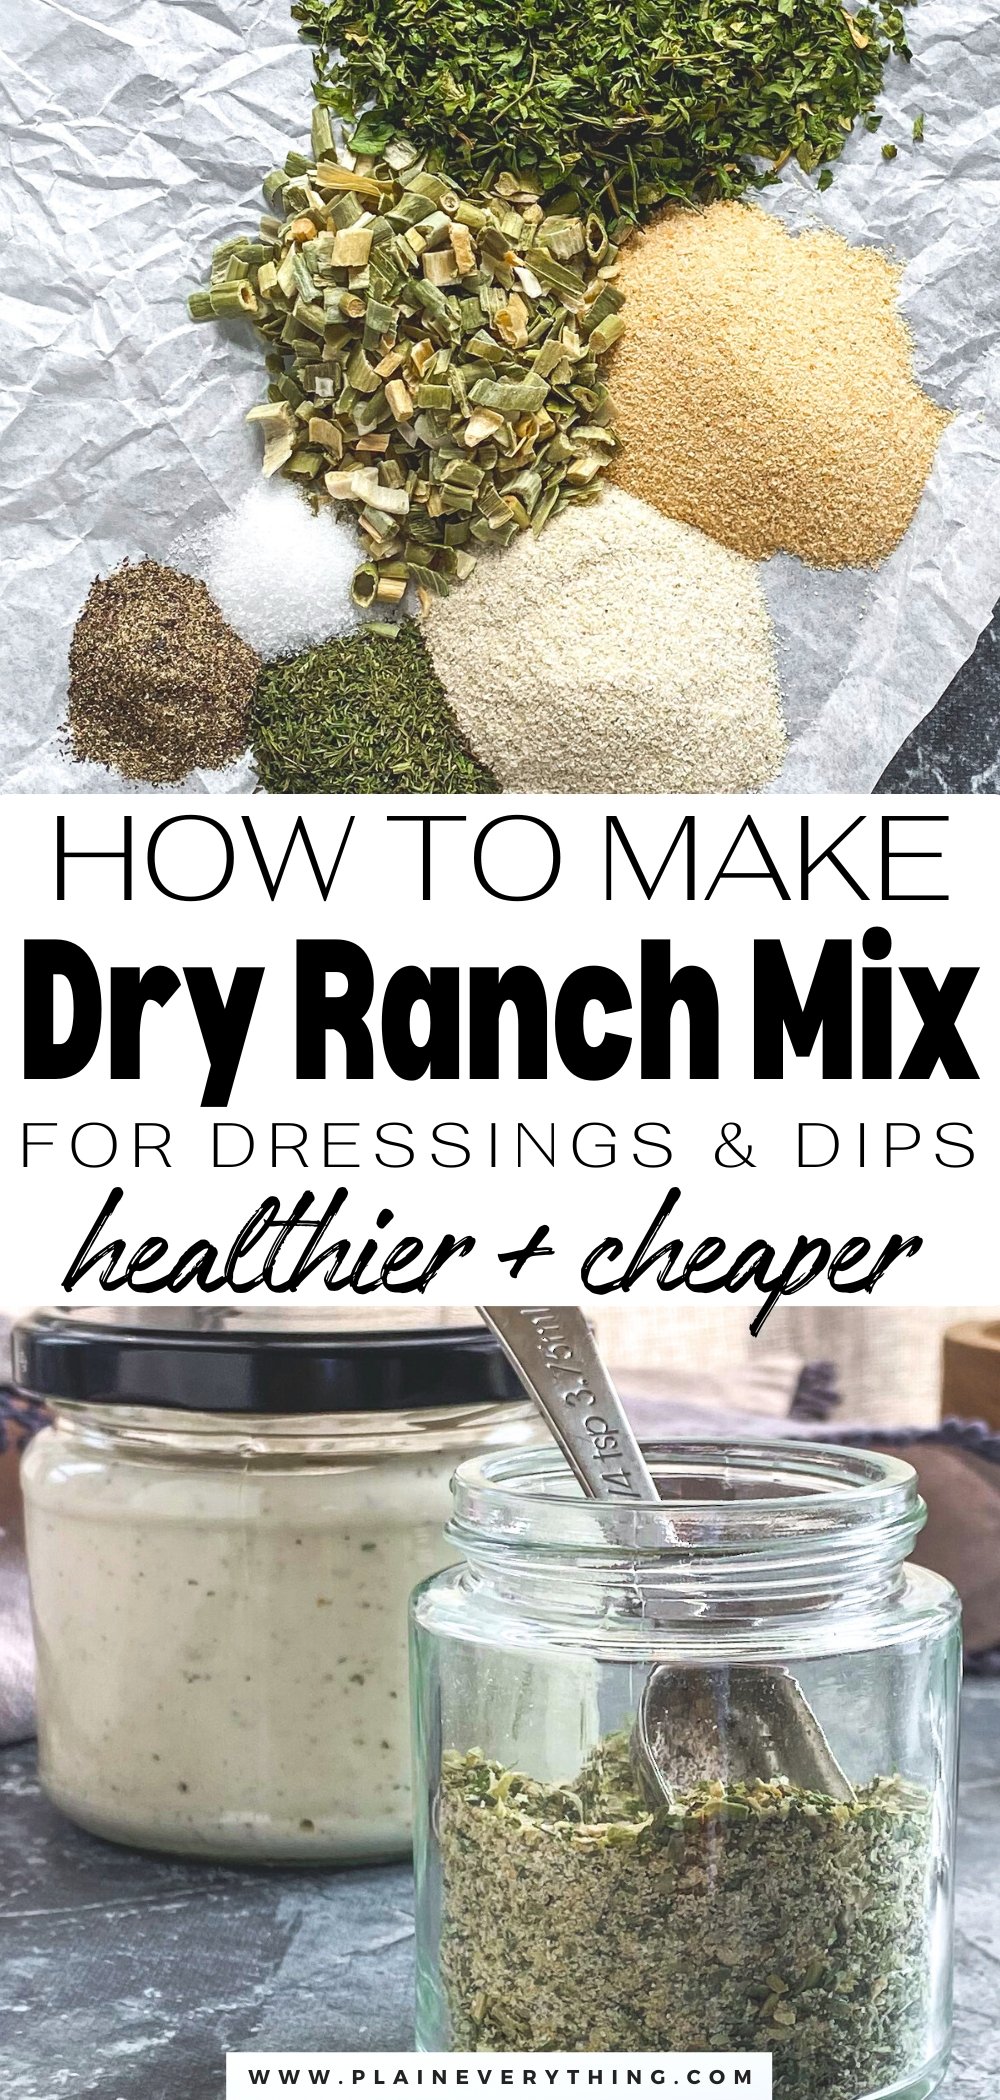 Dry Ranch Mix